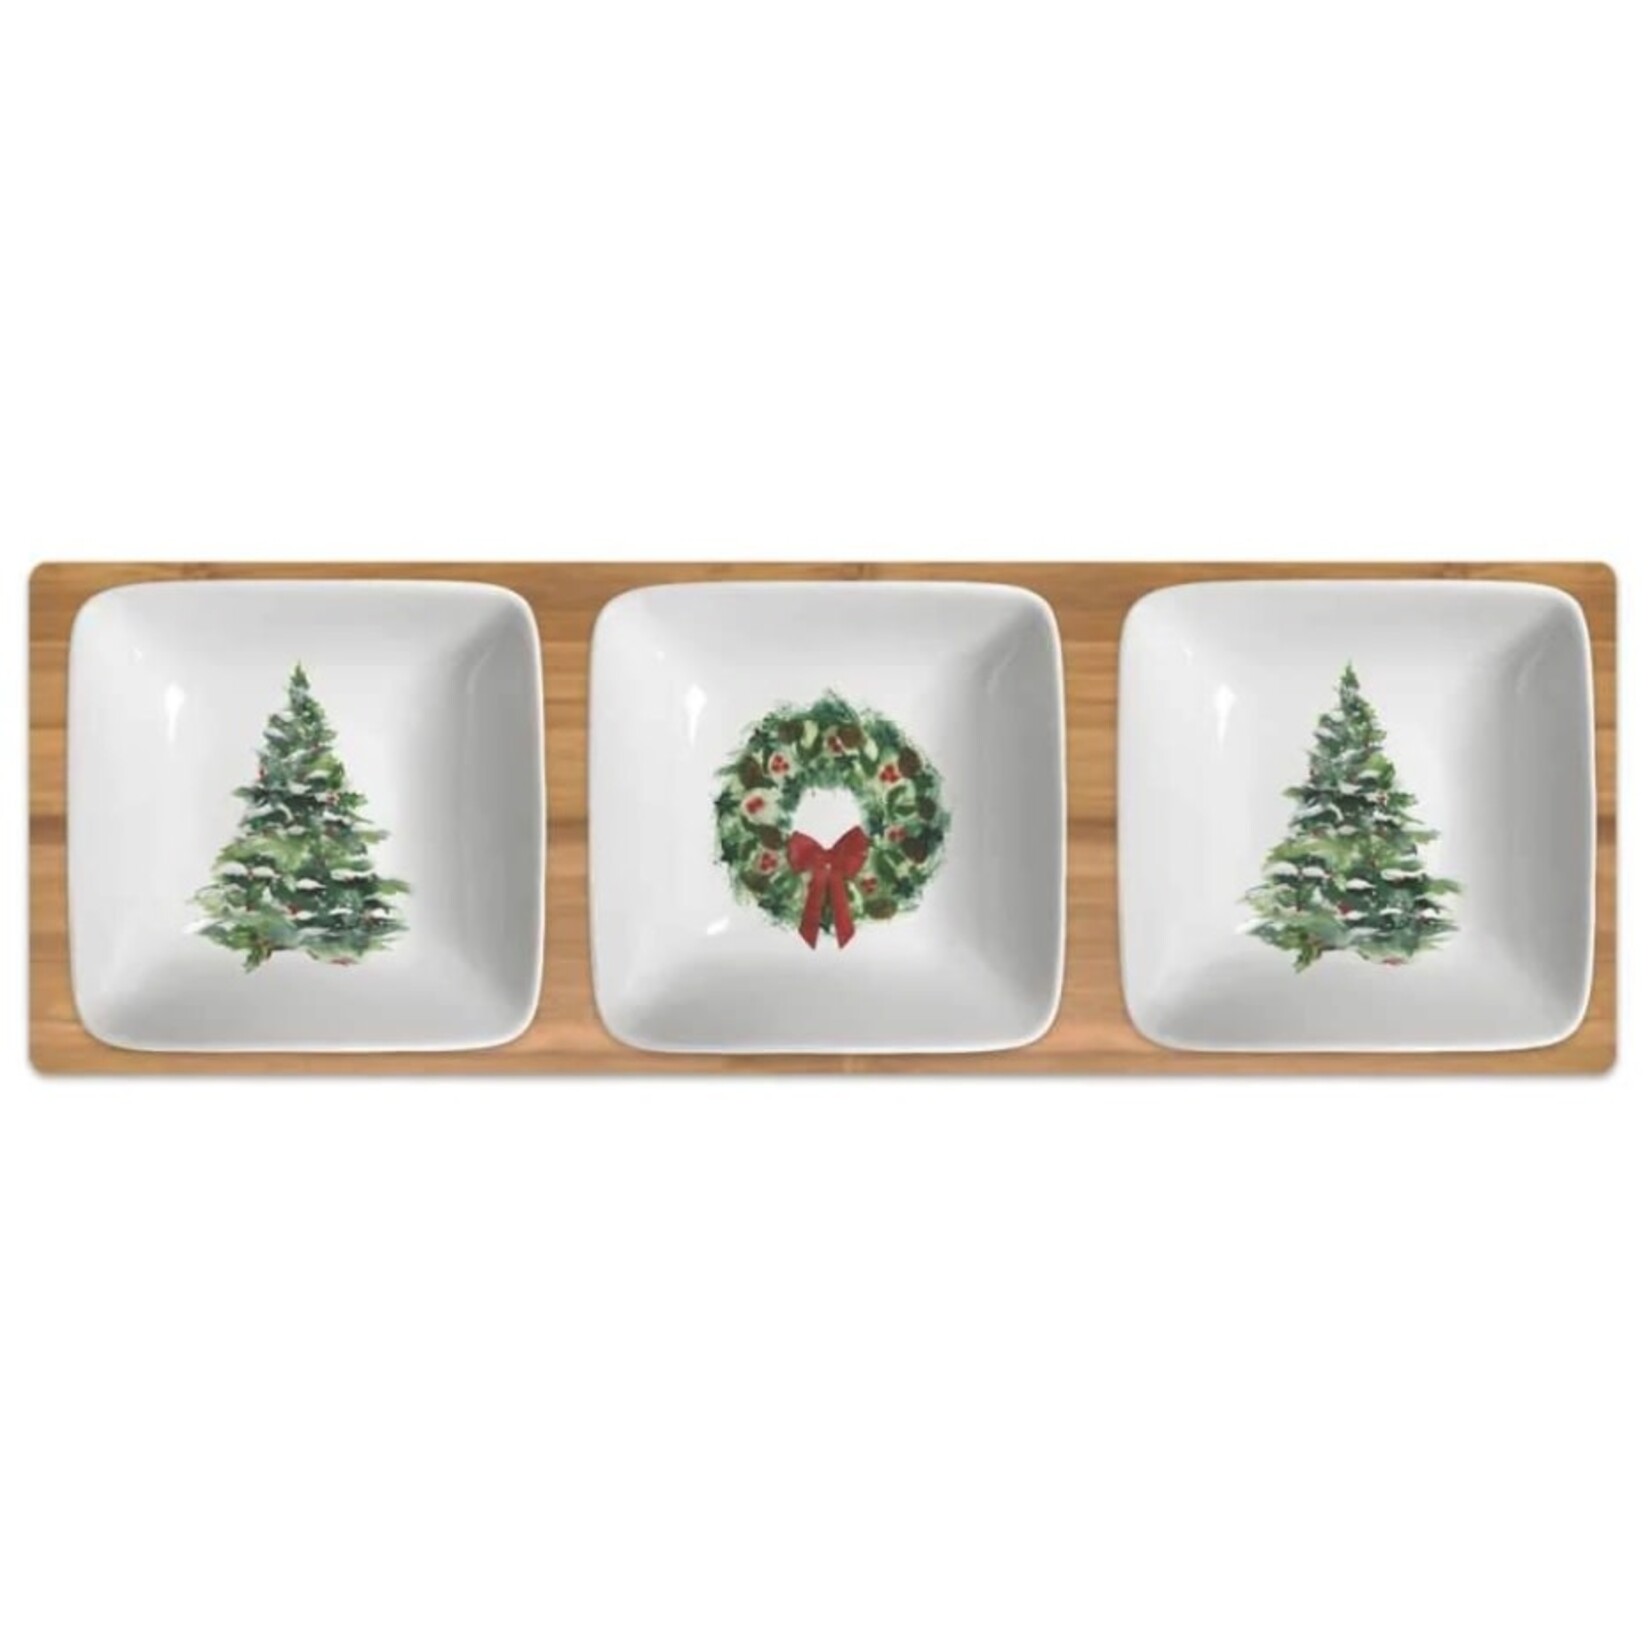 PAPER PRODUCTS DESIGN PPD Dipping Dish Set - Winter Tree & Wreath